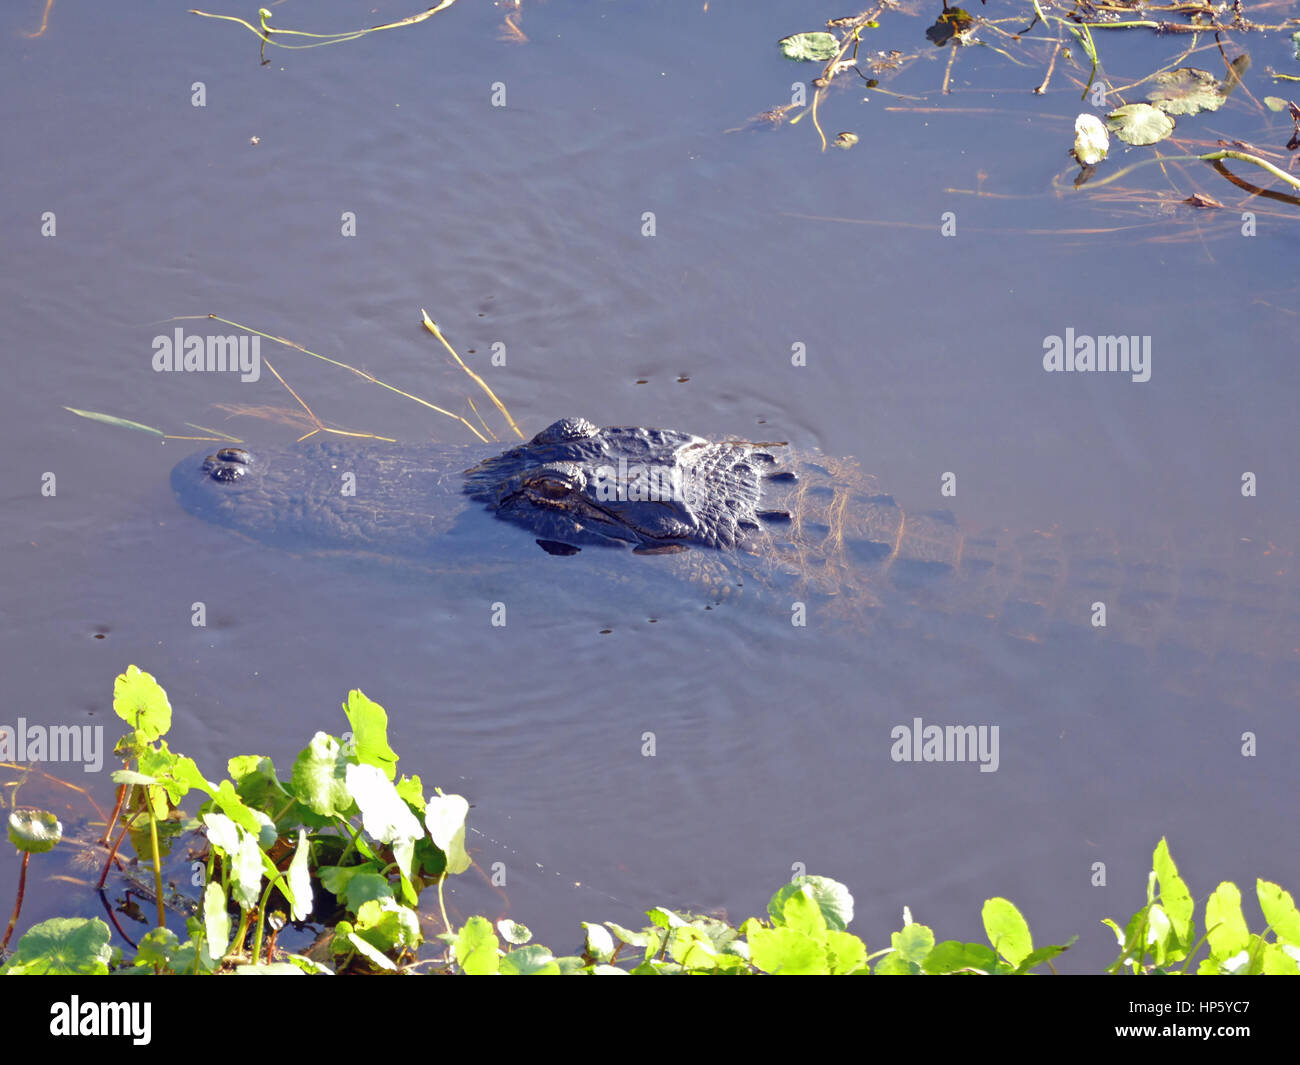 Young Alligator (A. mississippiensis except for Eyes and Snout, Paynes Prairie Preserve State Park, Gainesville, Florida, USA Stock Photo